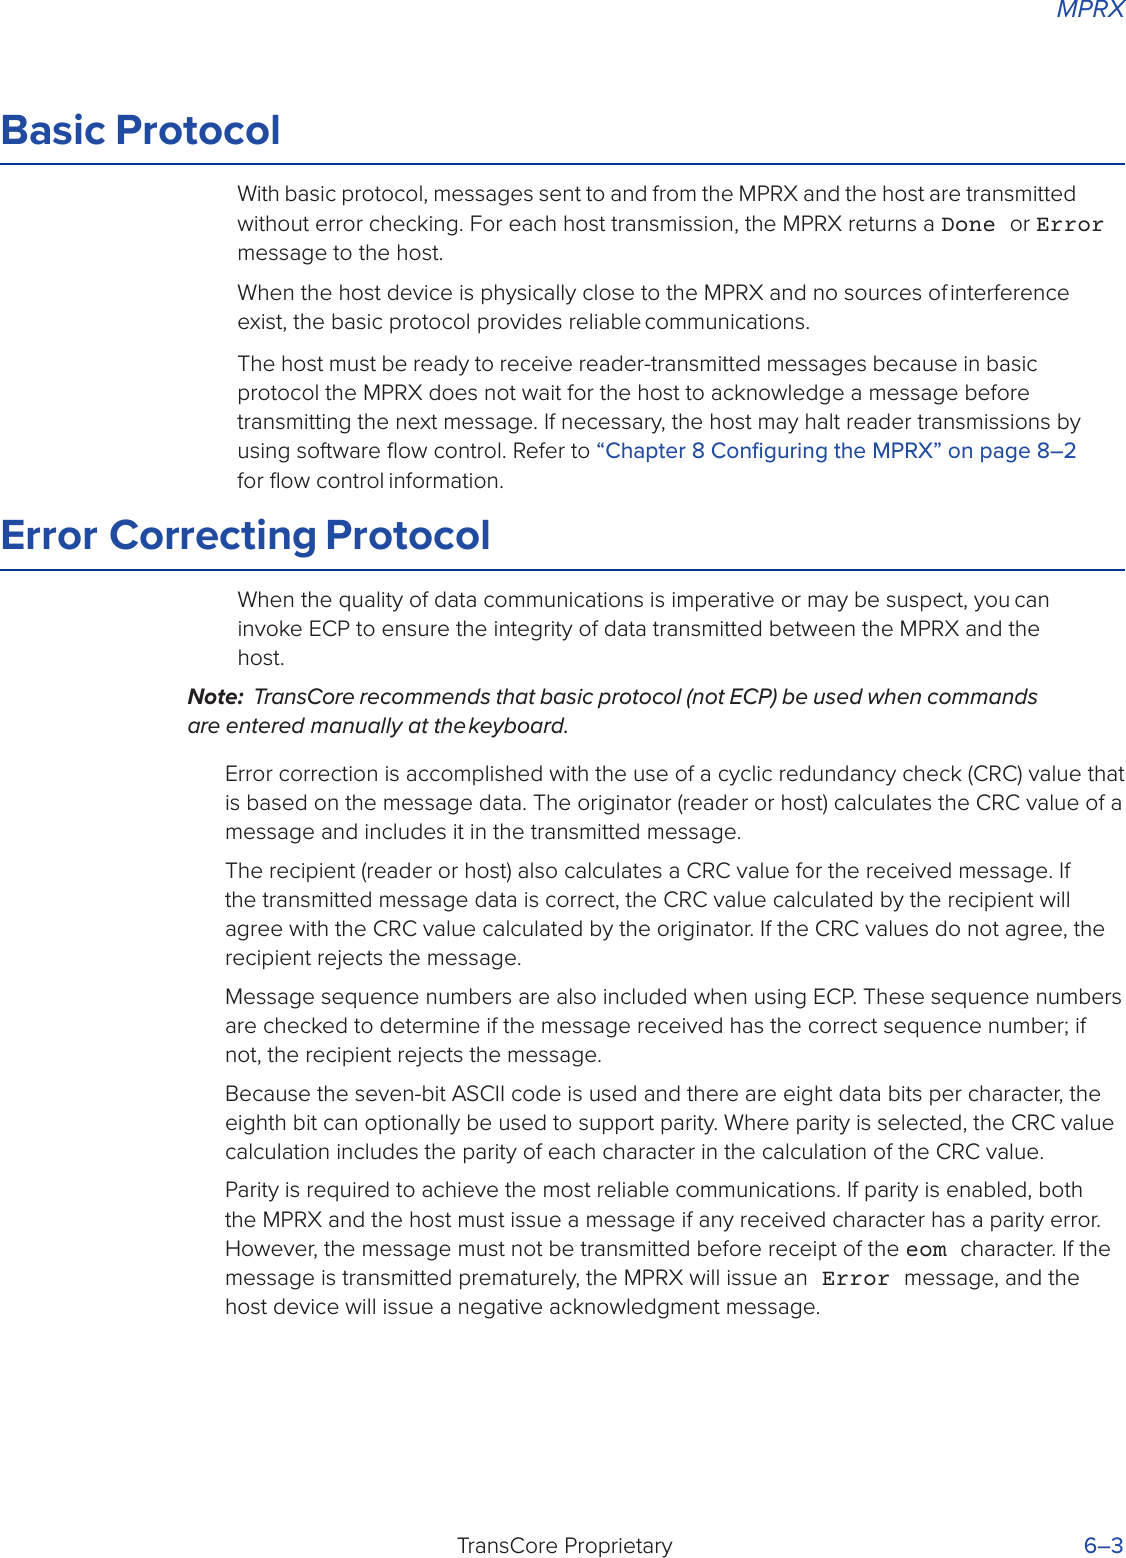 MPRXTransCore Proprietary 6–3Basic ProtocolWith basic protocol, messages sent to and from the MPRX and the host are transmitted without error checking. For each host transmission, the MPRX returns a Done or Error message to the host.When the host device is physically close to the MPRX and no sources of interference exist, the basic protocol provides reliable communications.The host must be ready to receive reader-transmitted messages because in basic protocol the MPRX does not wait for the host to acknowledge a message before transmitting the next message. If necessary, the host may halt reader transmissions by using software ﬂow control. Refer to “Chapter 8 Conﬁguring the MPRX” on page 8–2 for ﬂow control information.Error Correcting ProtocolWhen the quality of data communications is imperative or may be suspect, you can invoke ECP to ensure the integrity of data transmitted between the MPRX and the host.Note:  TransCore recommends that basic protocol (not ECP) be used when commands are entered manually at the keyboard.Error correction is accomplished with the use of a cyclic redundancy check (CRC) value that is based on the message data. The originator (reader or host) calculates the CRC value of a message and includes it in the transmitted message.The recipient (reader or host) also calculates a CRC value for the received message. If the transmitted message data is correct, the CRC value calculated by the recipient will agree with the CRC value calculated by the originator. If the CRC values do not agree, the recipient rejects the message.Message sequence numbers are also included when using ECP. These sequence numbers are checked to determine if the message received has the correct sequence number; if not, the recipient rejects the message.Because the seven-bit ASCII code is used and there are eight data bits per character, the eighth bit can optionally be used to support parity. Where parity is selected, the CRC value calculation includes the parity of each character in the calculation of the CRC value.Parity is required to achieve the most reliable communications. If parity is enabled, both the MPRX and the host must issue a message if any received character has a parity error. However, the message must not be transmitted before receipt of the eom character. If the message is transmitted prematurely, the MPRX will issue an Error message, and the host device will issue a negative acknowledgment message.